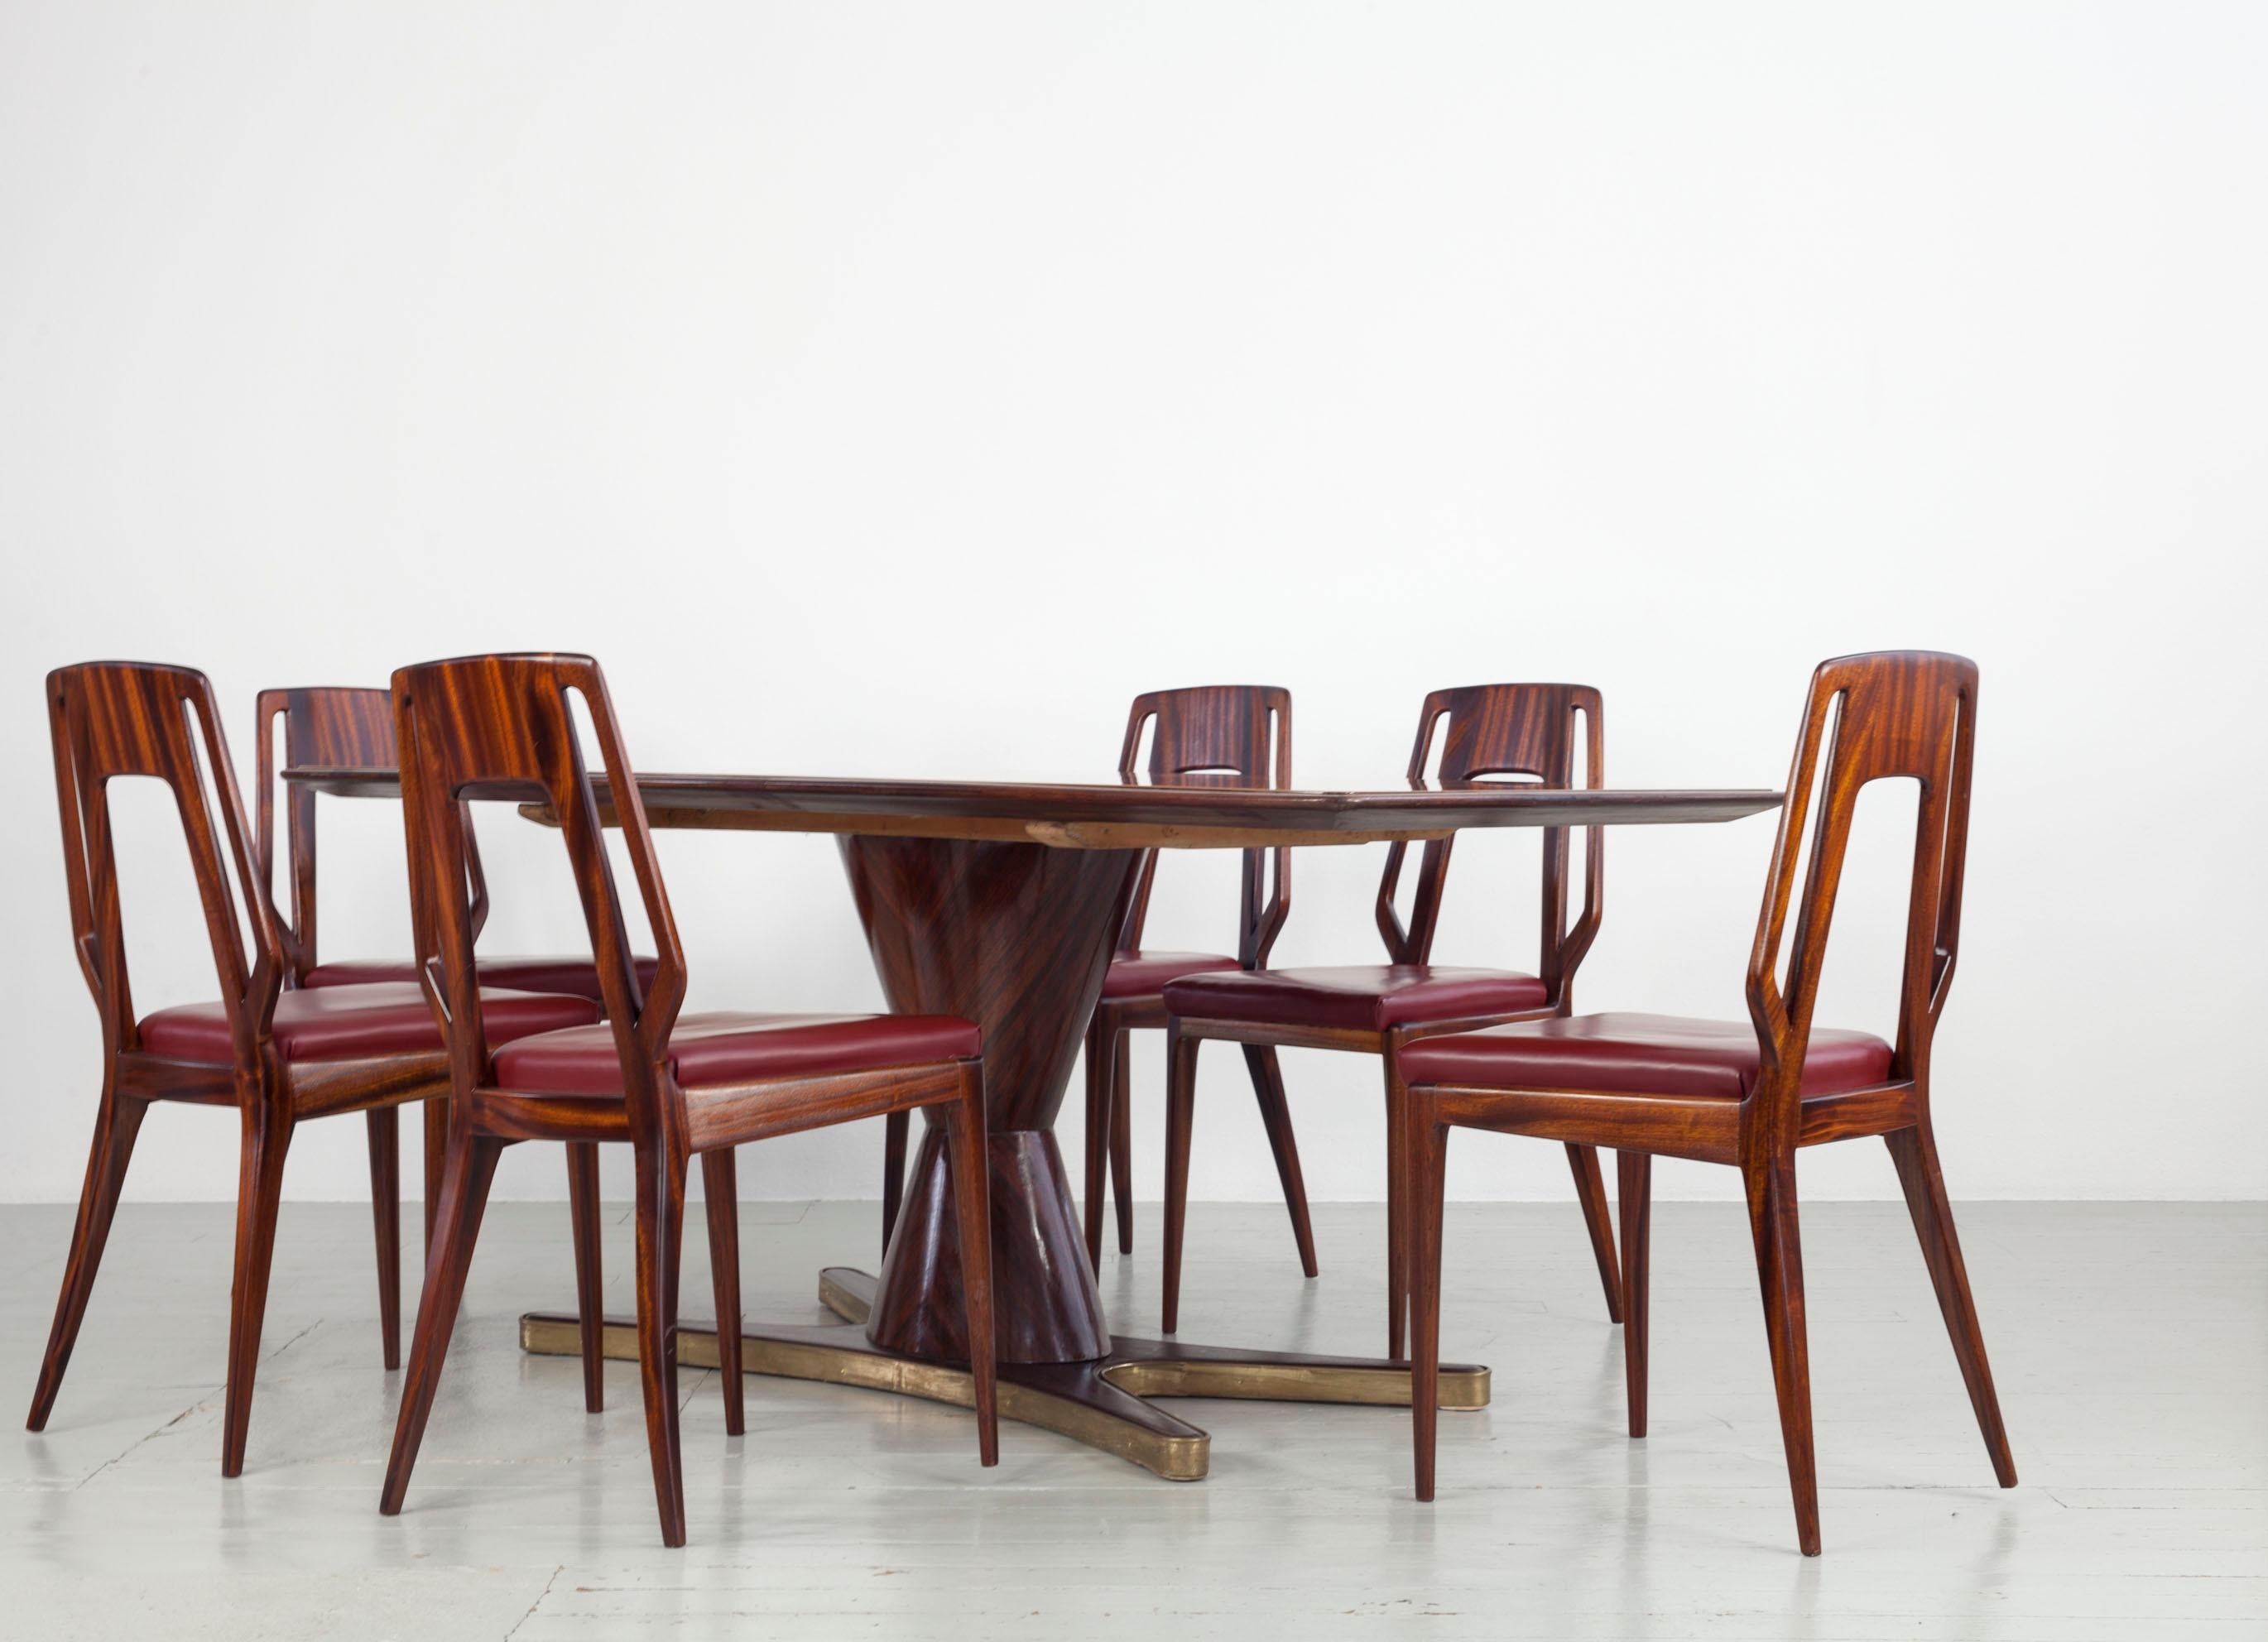 Set of 6 Italian Vittorio Dassi Dining Room Chairs, 1950s For Sale 10